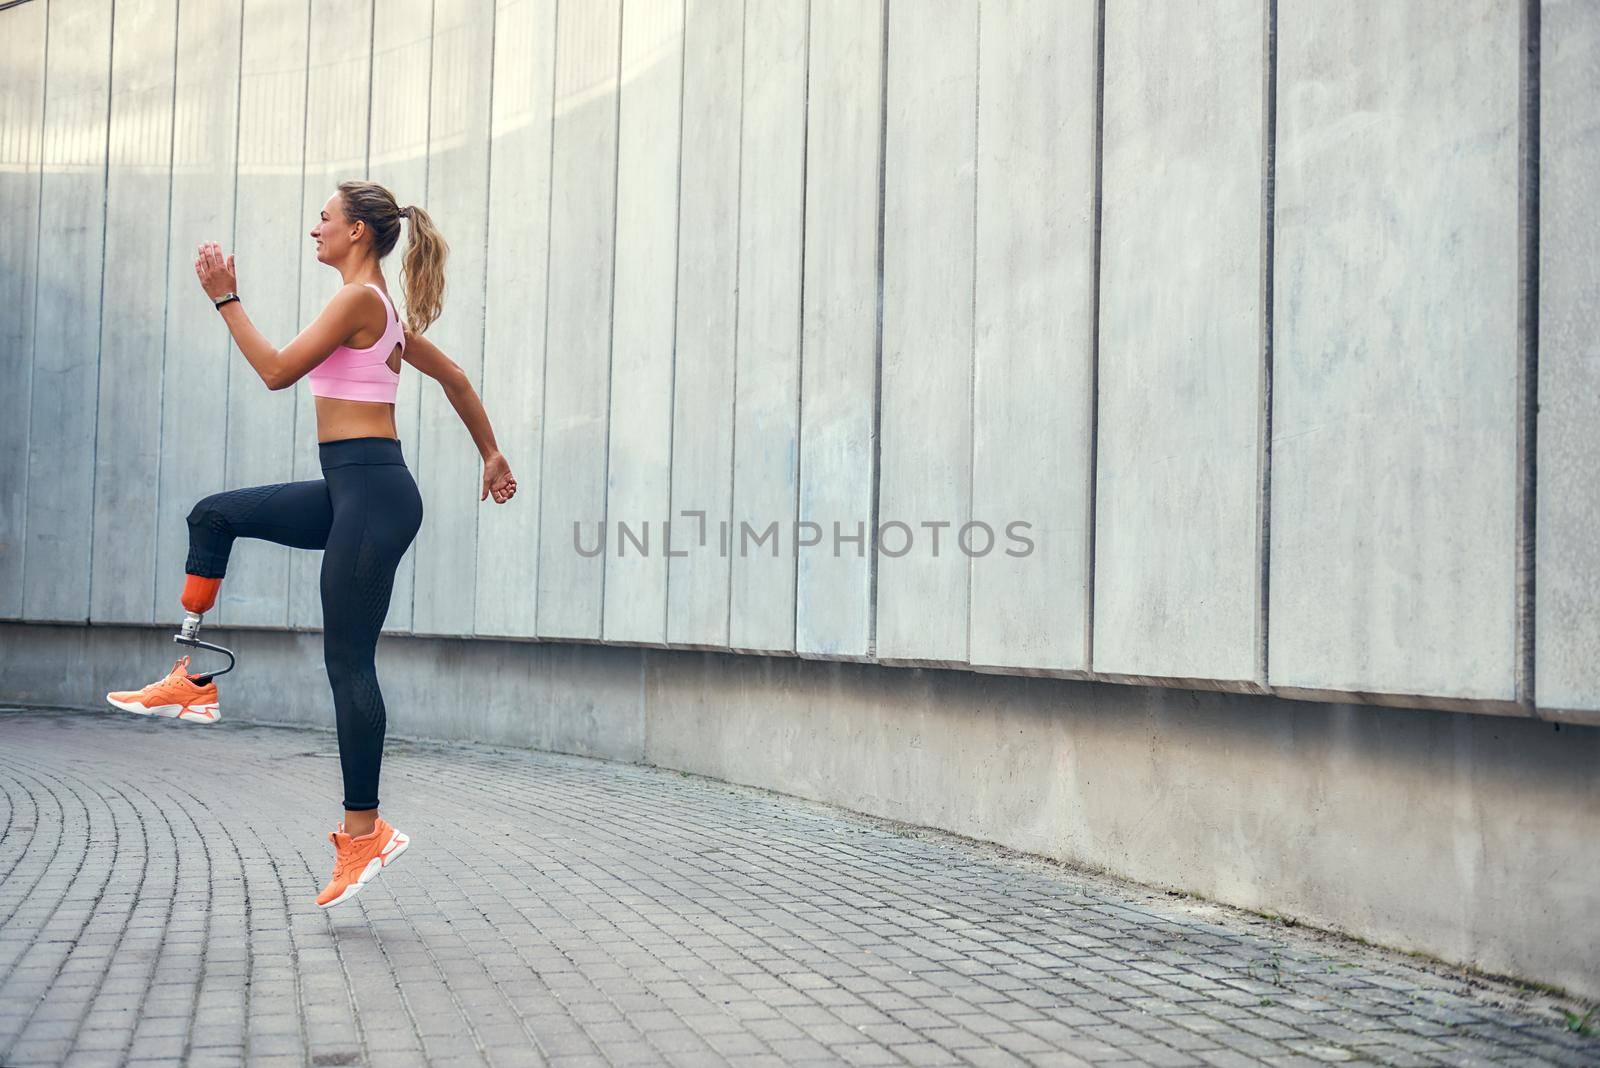 No limits Active disabled woman with leg prosthesis in sports clothing jumping while her morning workout outdoors. Disabled sport concept. Motivation. Healthy lifestyle